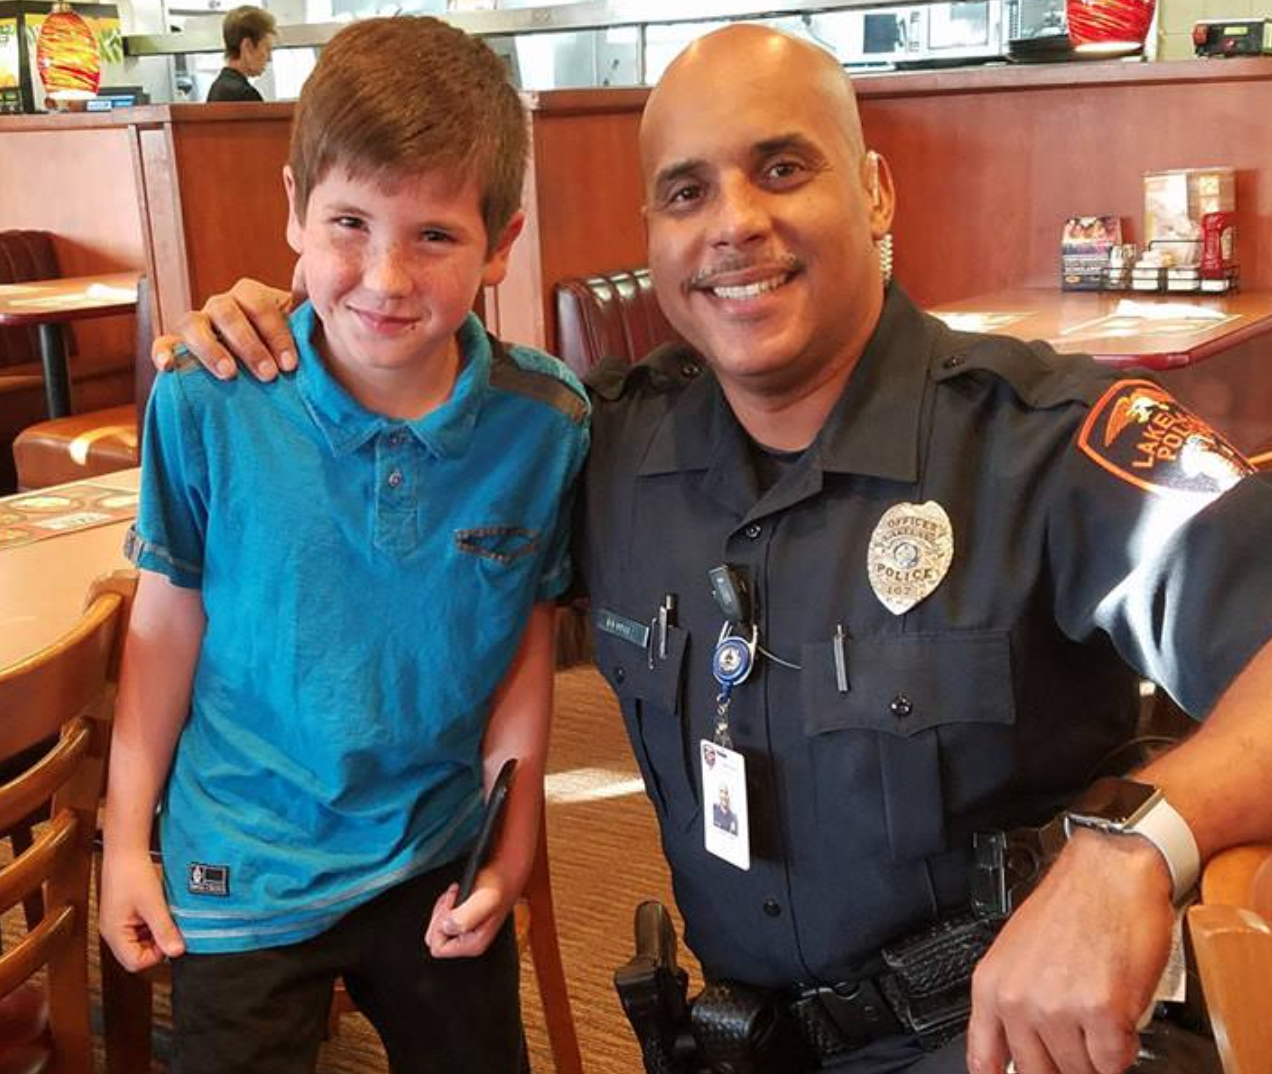 9-year-old boy gives police officer a secret note. Reads the note and jumps out of his chair.